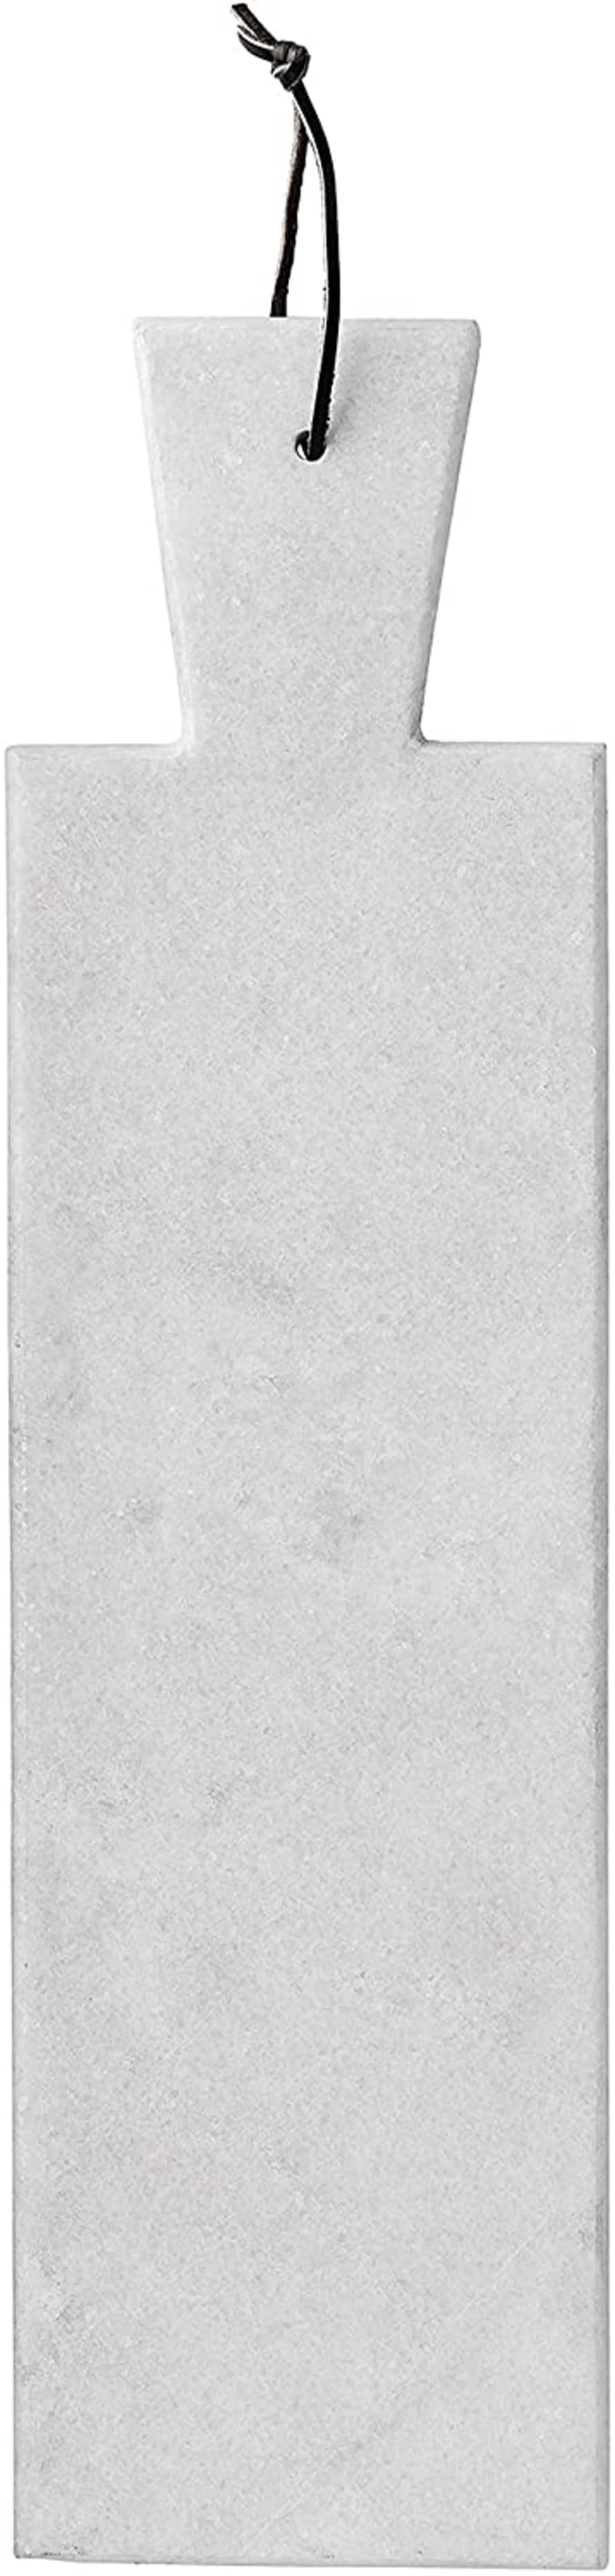 Bloomingville Marble Cutting Board with Strap, White